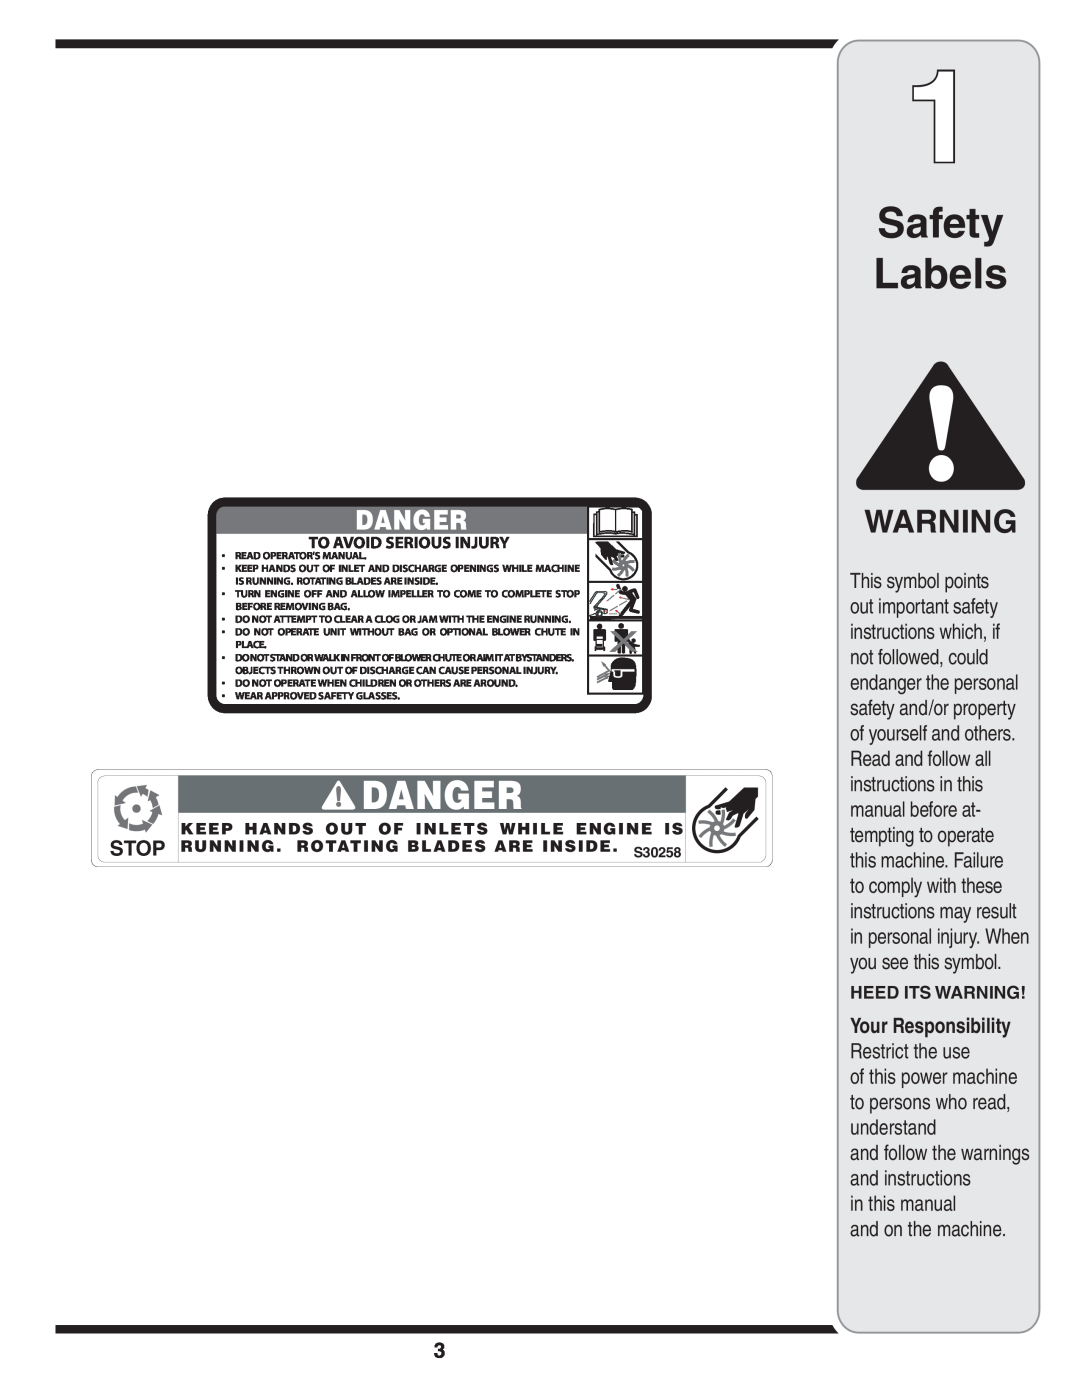 Troy-Bilt 24A-070F768 warranty Safety Labels, in this manual and on the machine, Heed Its Warning 